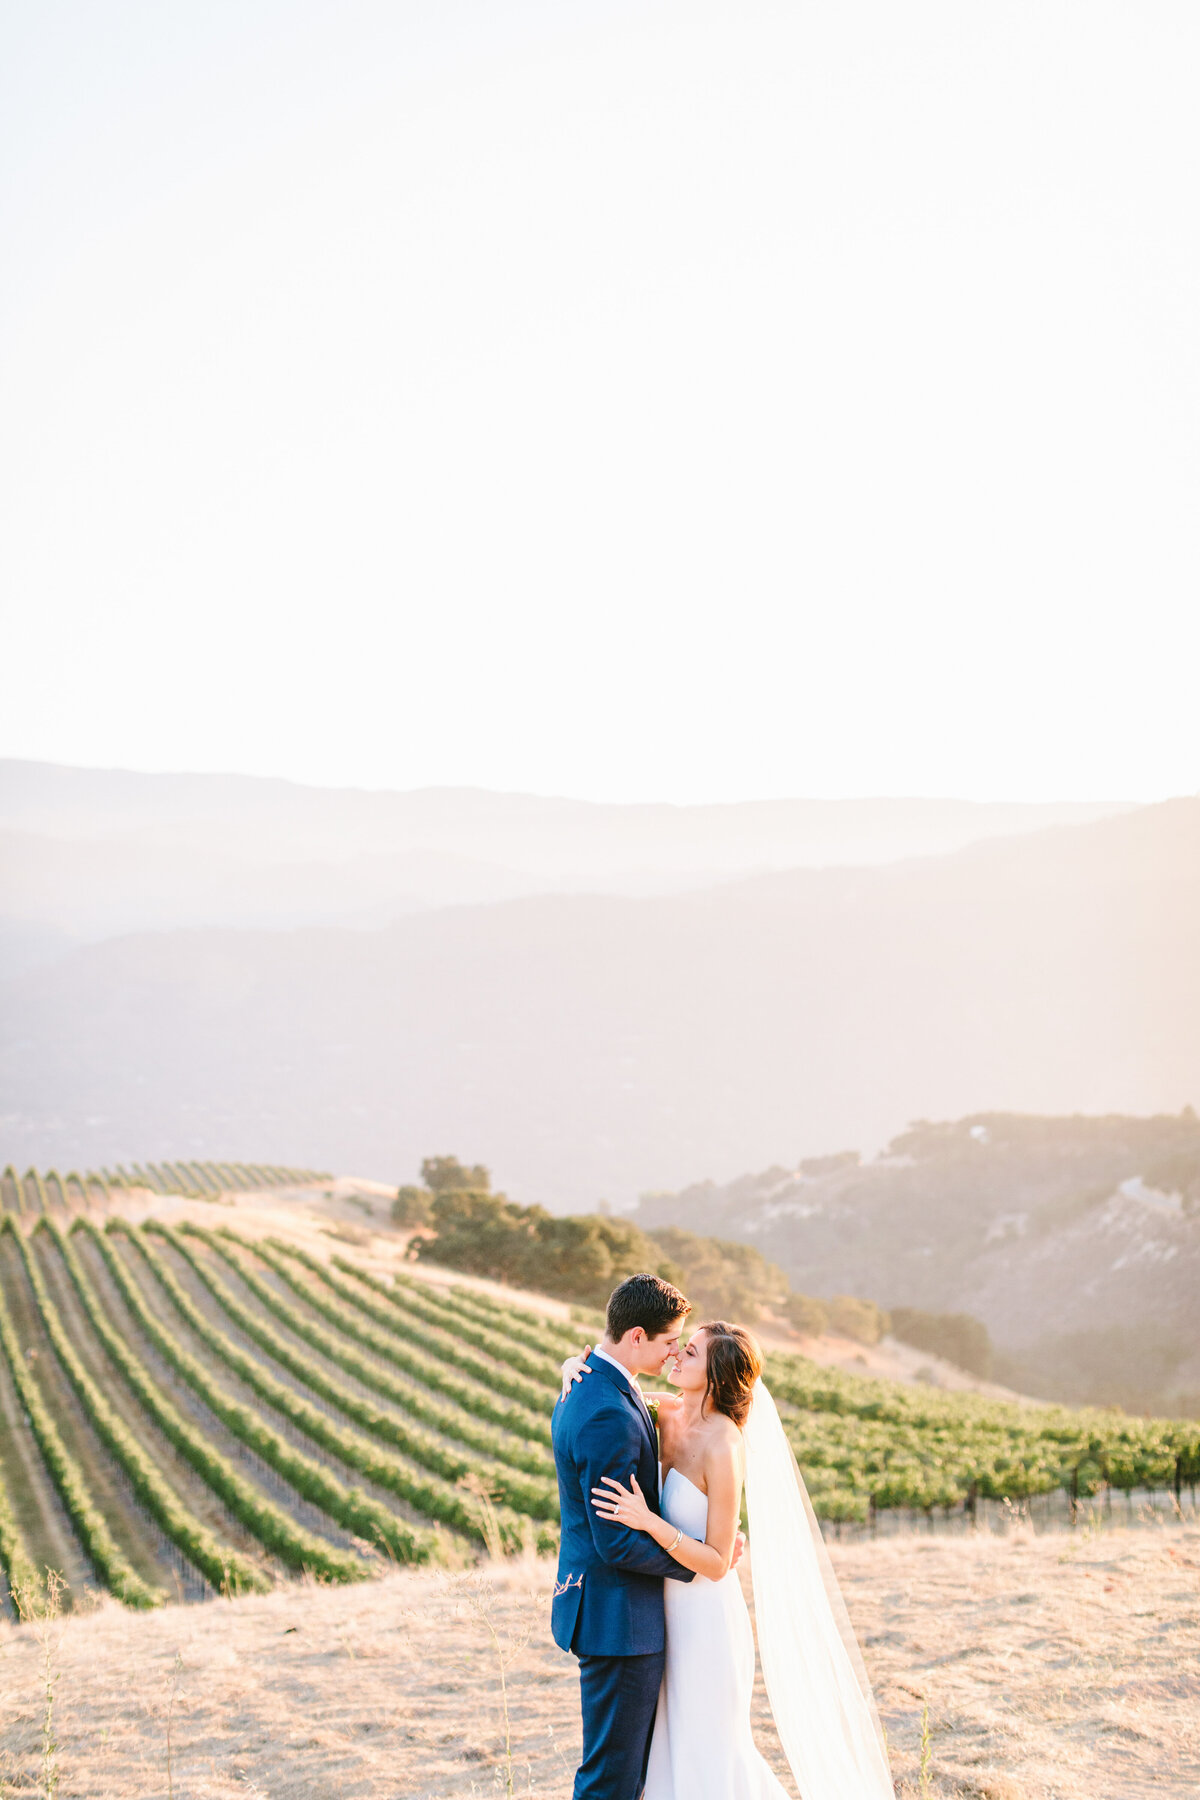 Best California and Texas Wedding Photographer-Header Images-Jodee Friday & Co-80